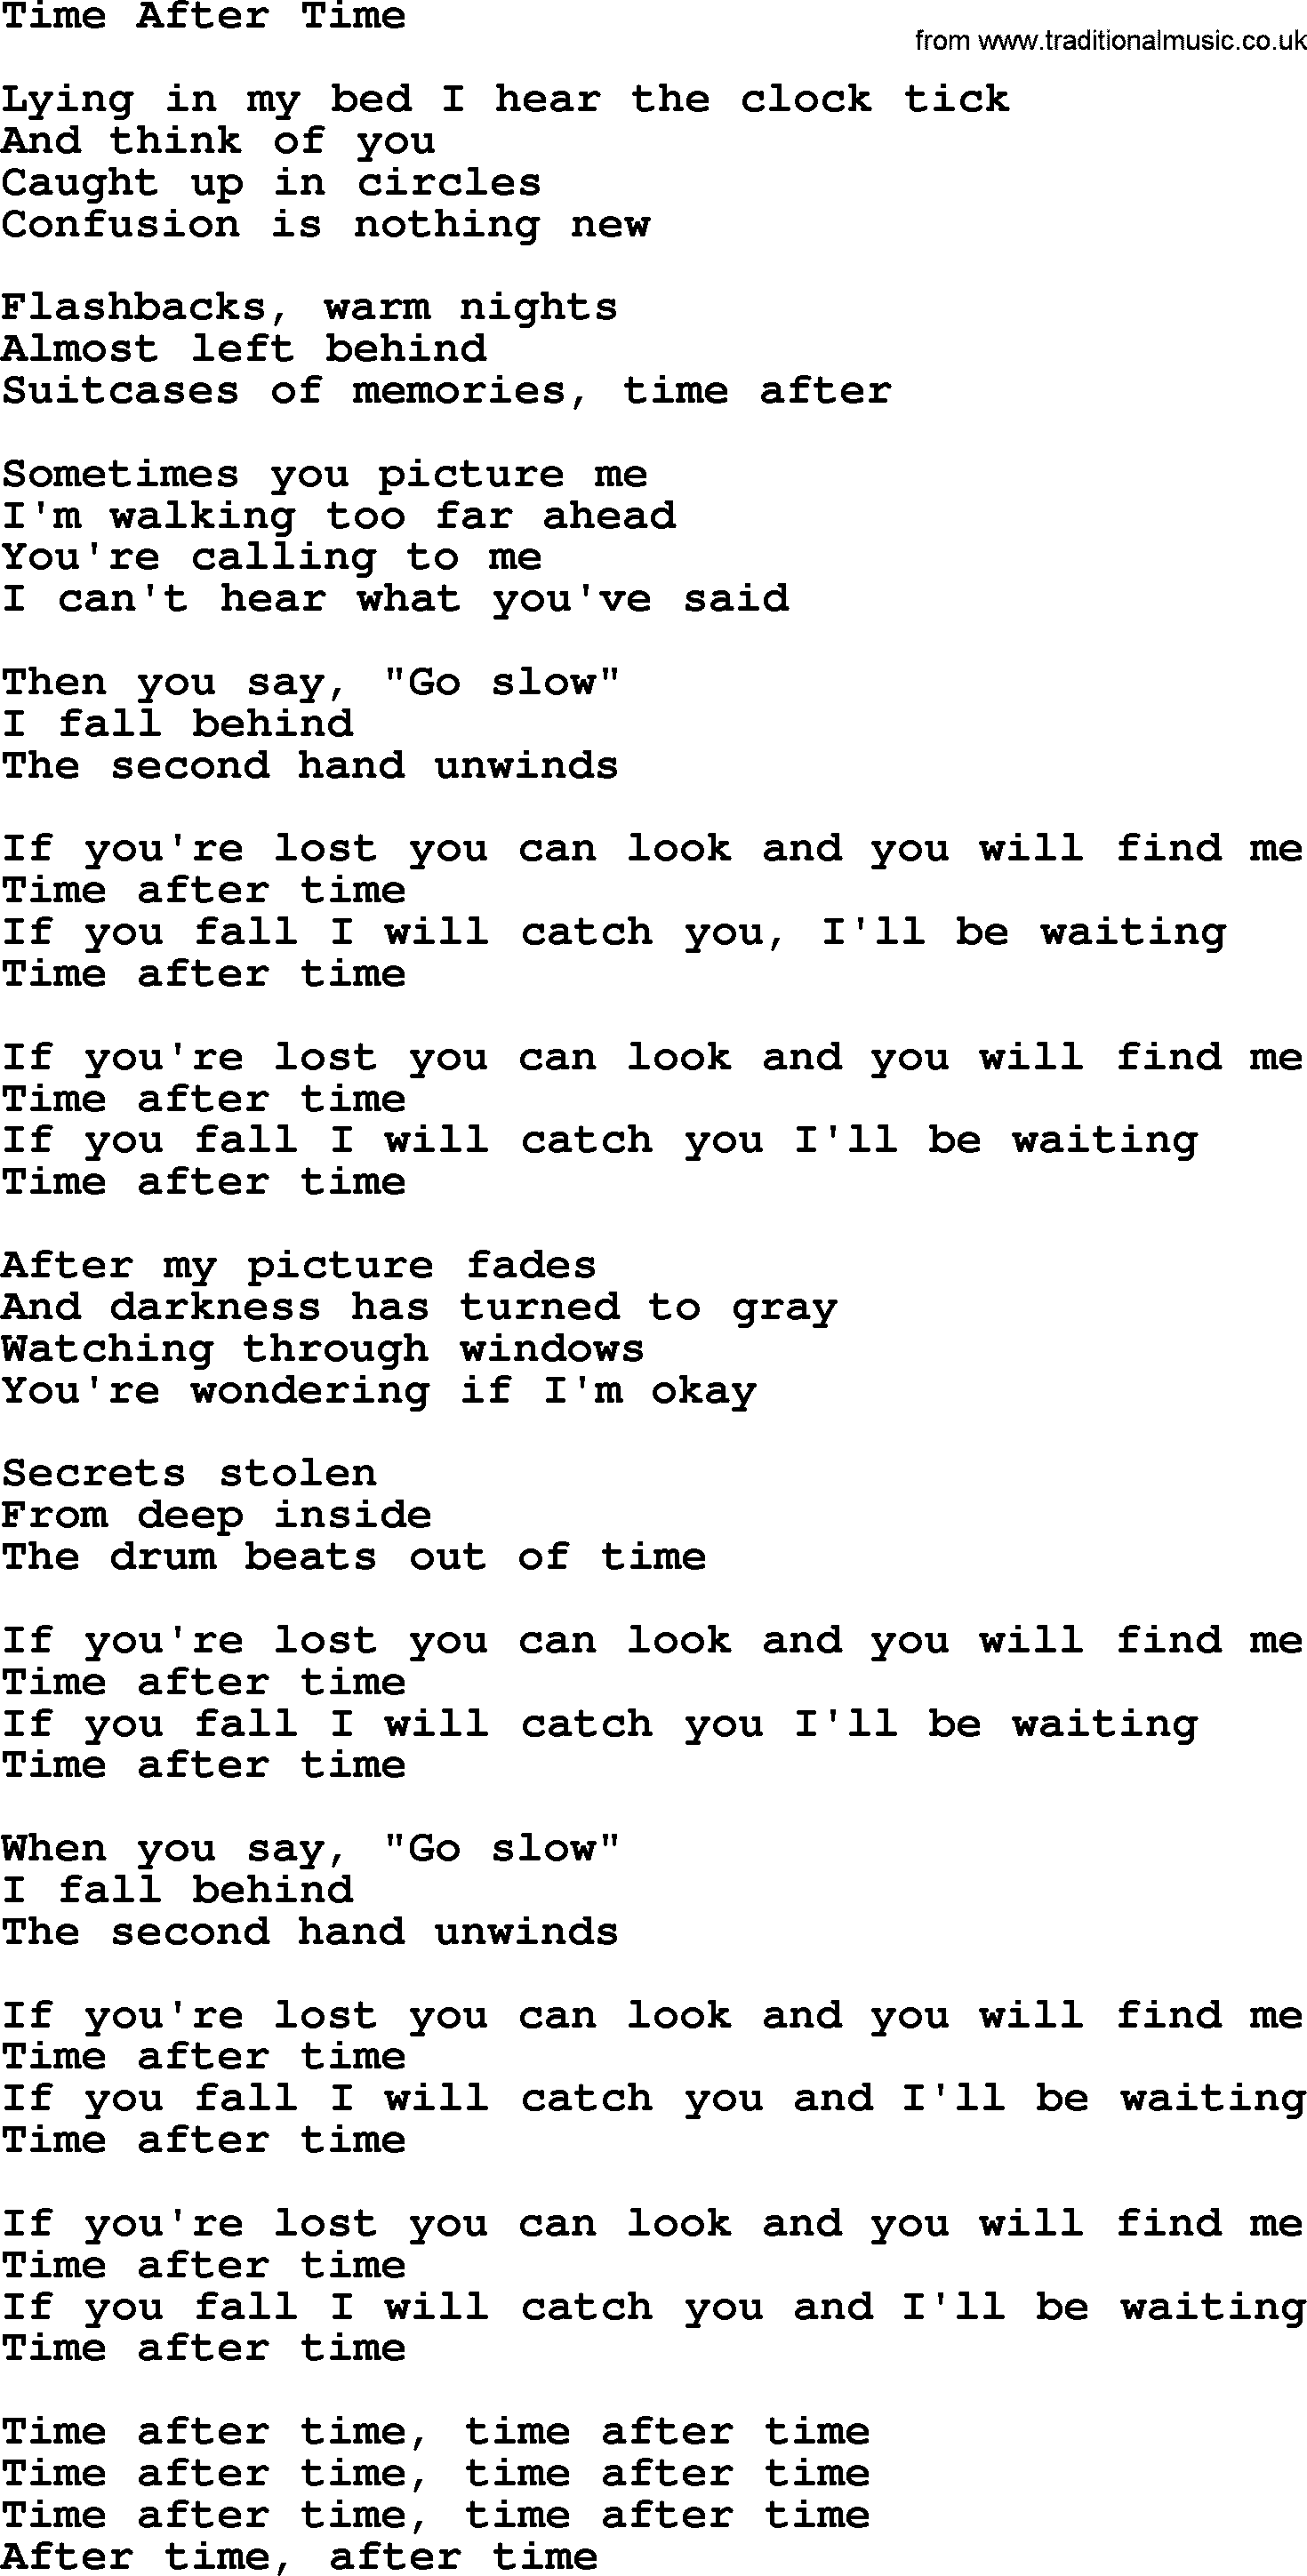 Willie Nelson song: Time After Time lyrics